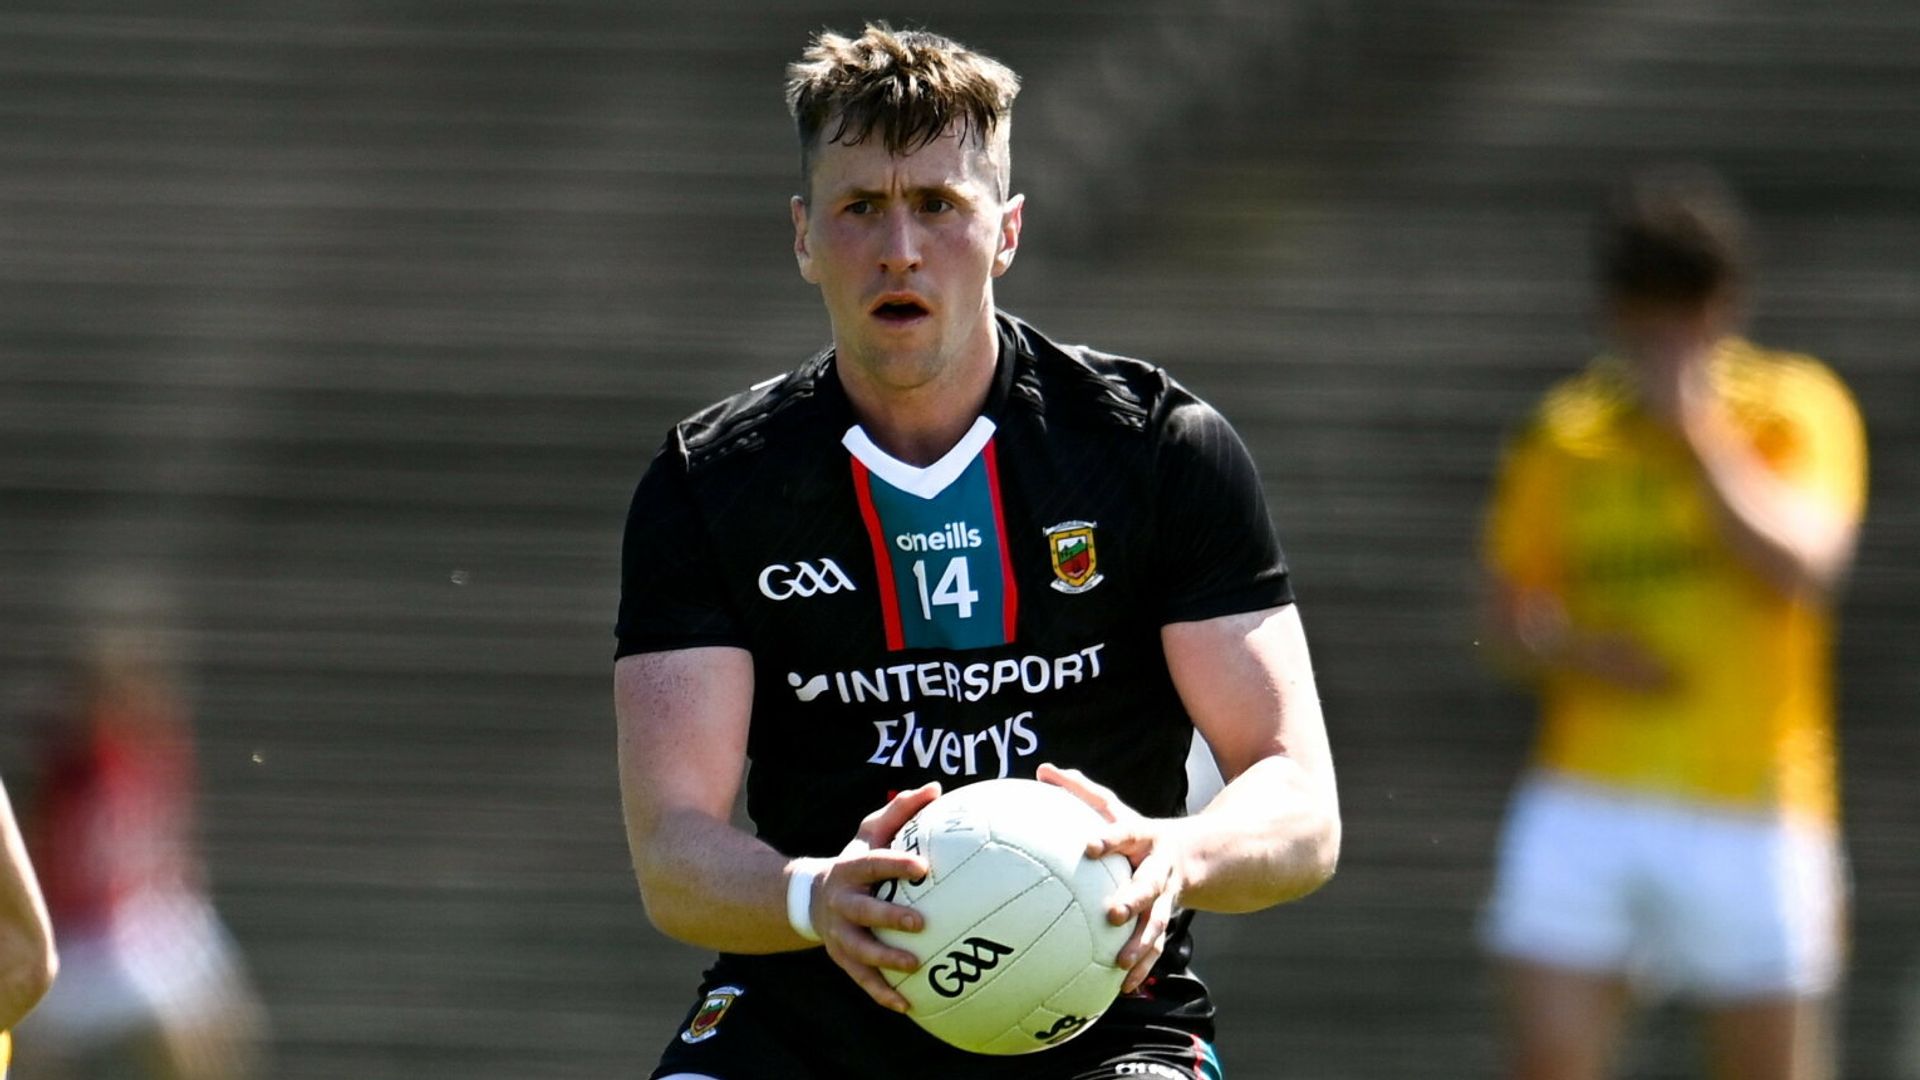 Mayo's O'Connor ruled out for season